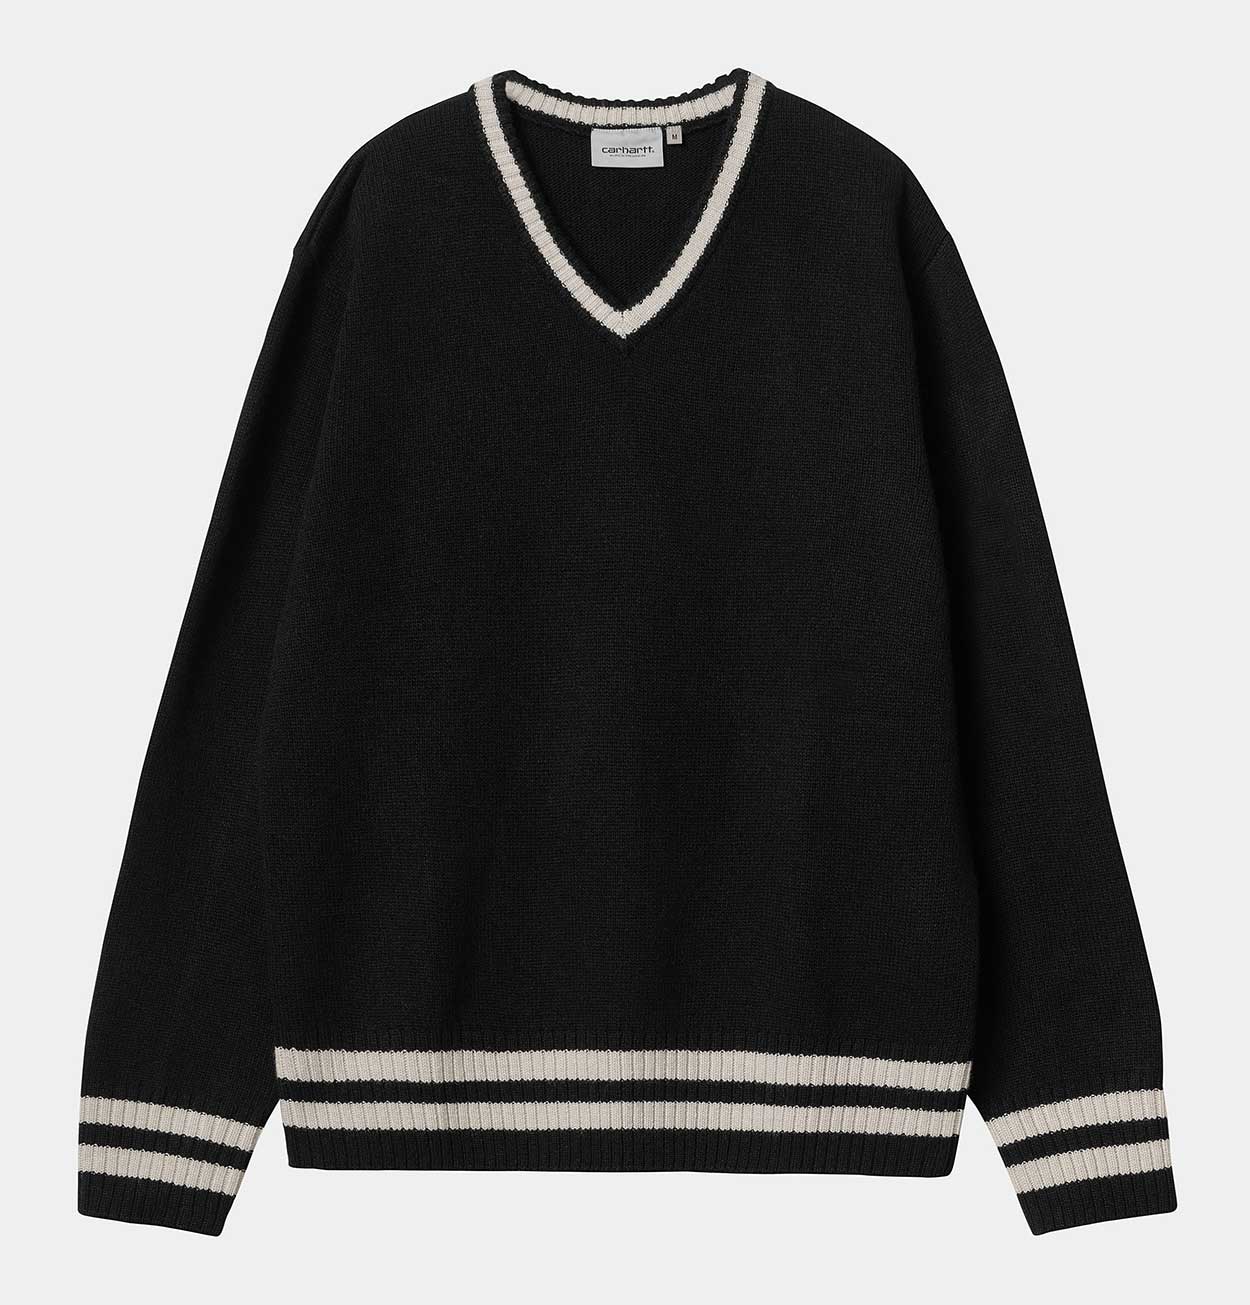 Carhartt WIP Stanford Sweater in Black and Salt – HUH. Store